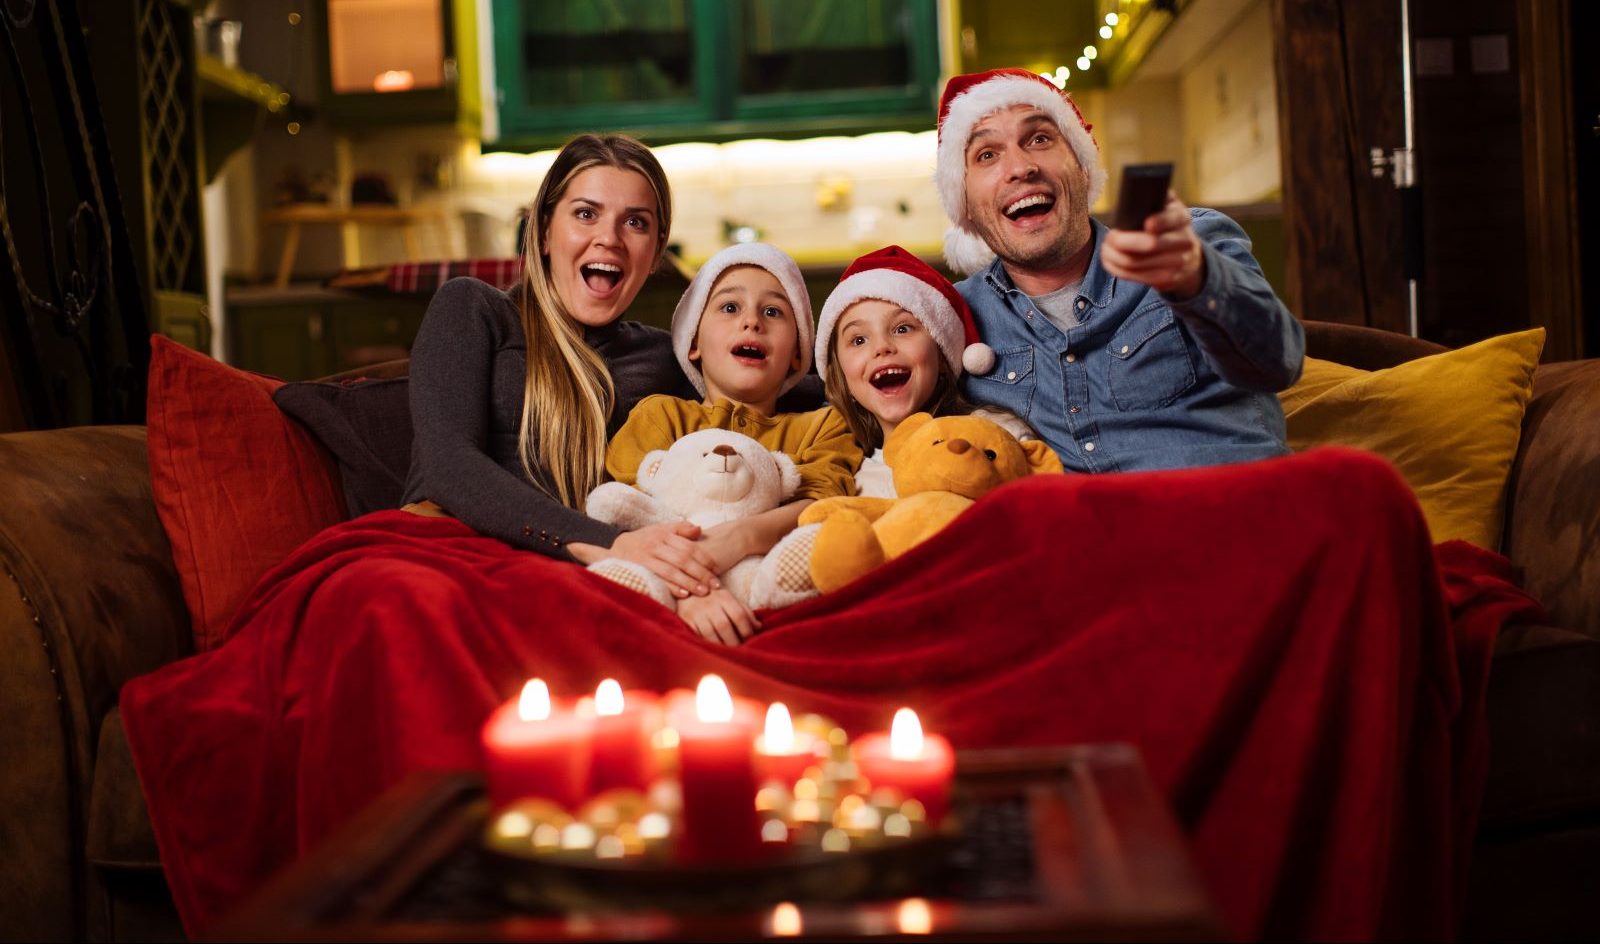 Holiday images, childhood memories, songs and Hallmark movies all contribute to a sense of happiness that can be dubbed the “holiday spirit."